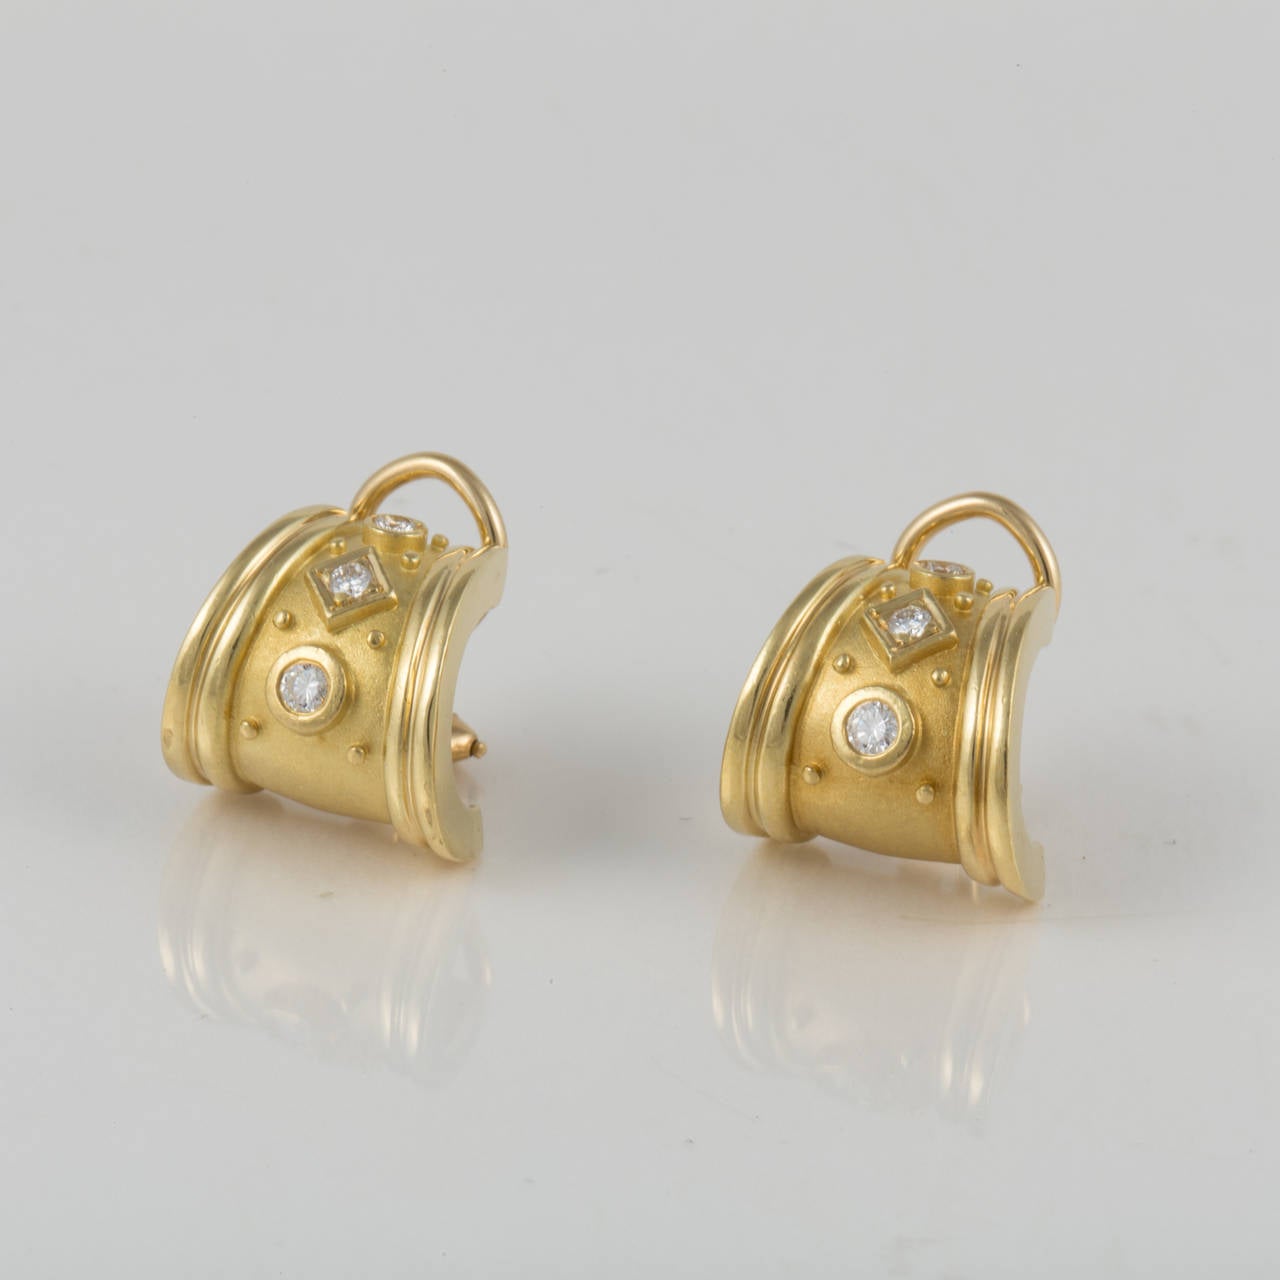 Yellow gold earrings by SeidenGang crafted in 18K.  From their Classic Collection, these earrings feature bezel set diamonds totaling 0.30 carats. They have Omega backs.  Hallmarked 